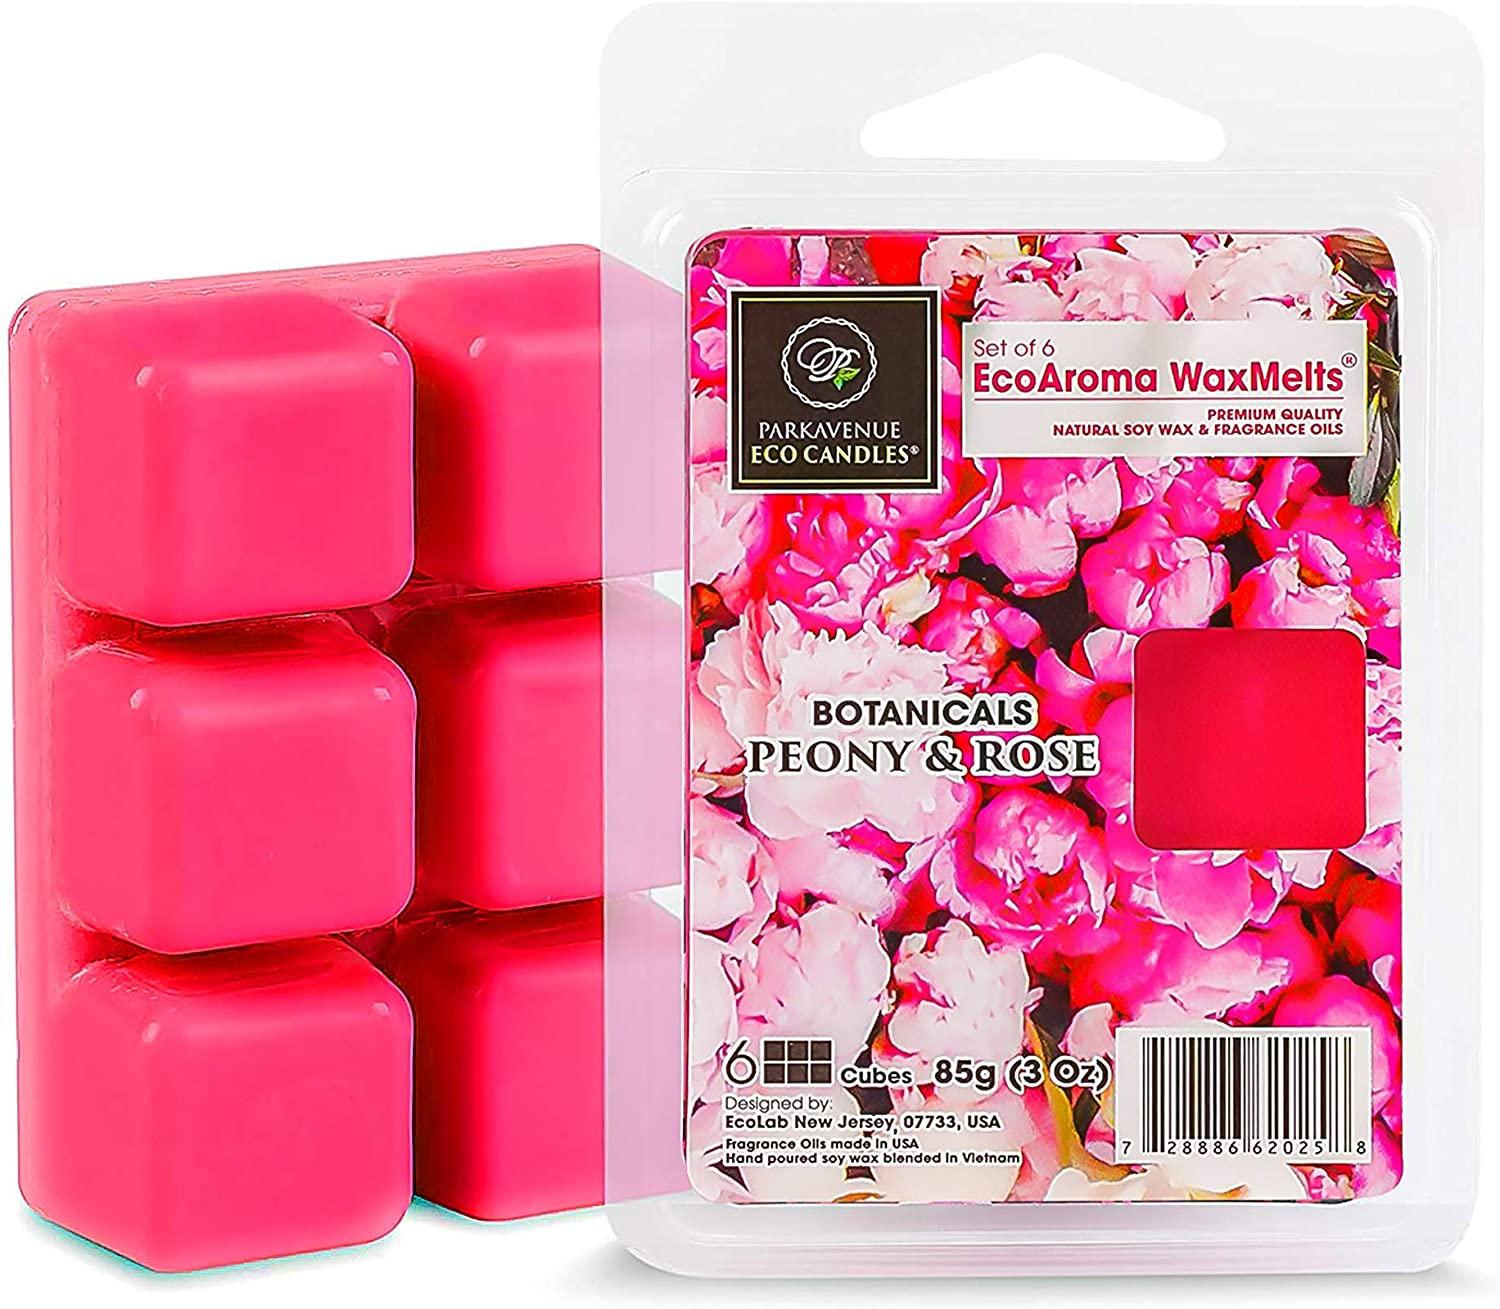 Eco Aroma Coco-Soy Candles, 6 Cubes (3 Oz Each)-Best Scentsy Wax Melts Wax  Cubes - Coconut Soy Wax Melts Candles with 100% Natural Essential Oils (2.  Sea Salt & Citrus, 2-Pack) 